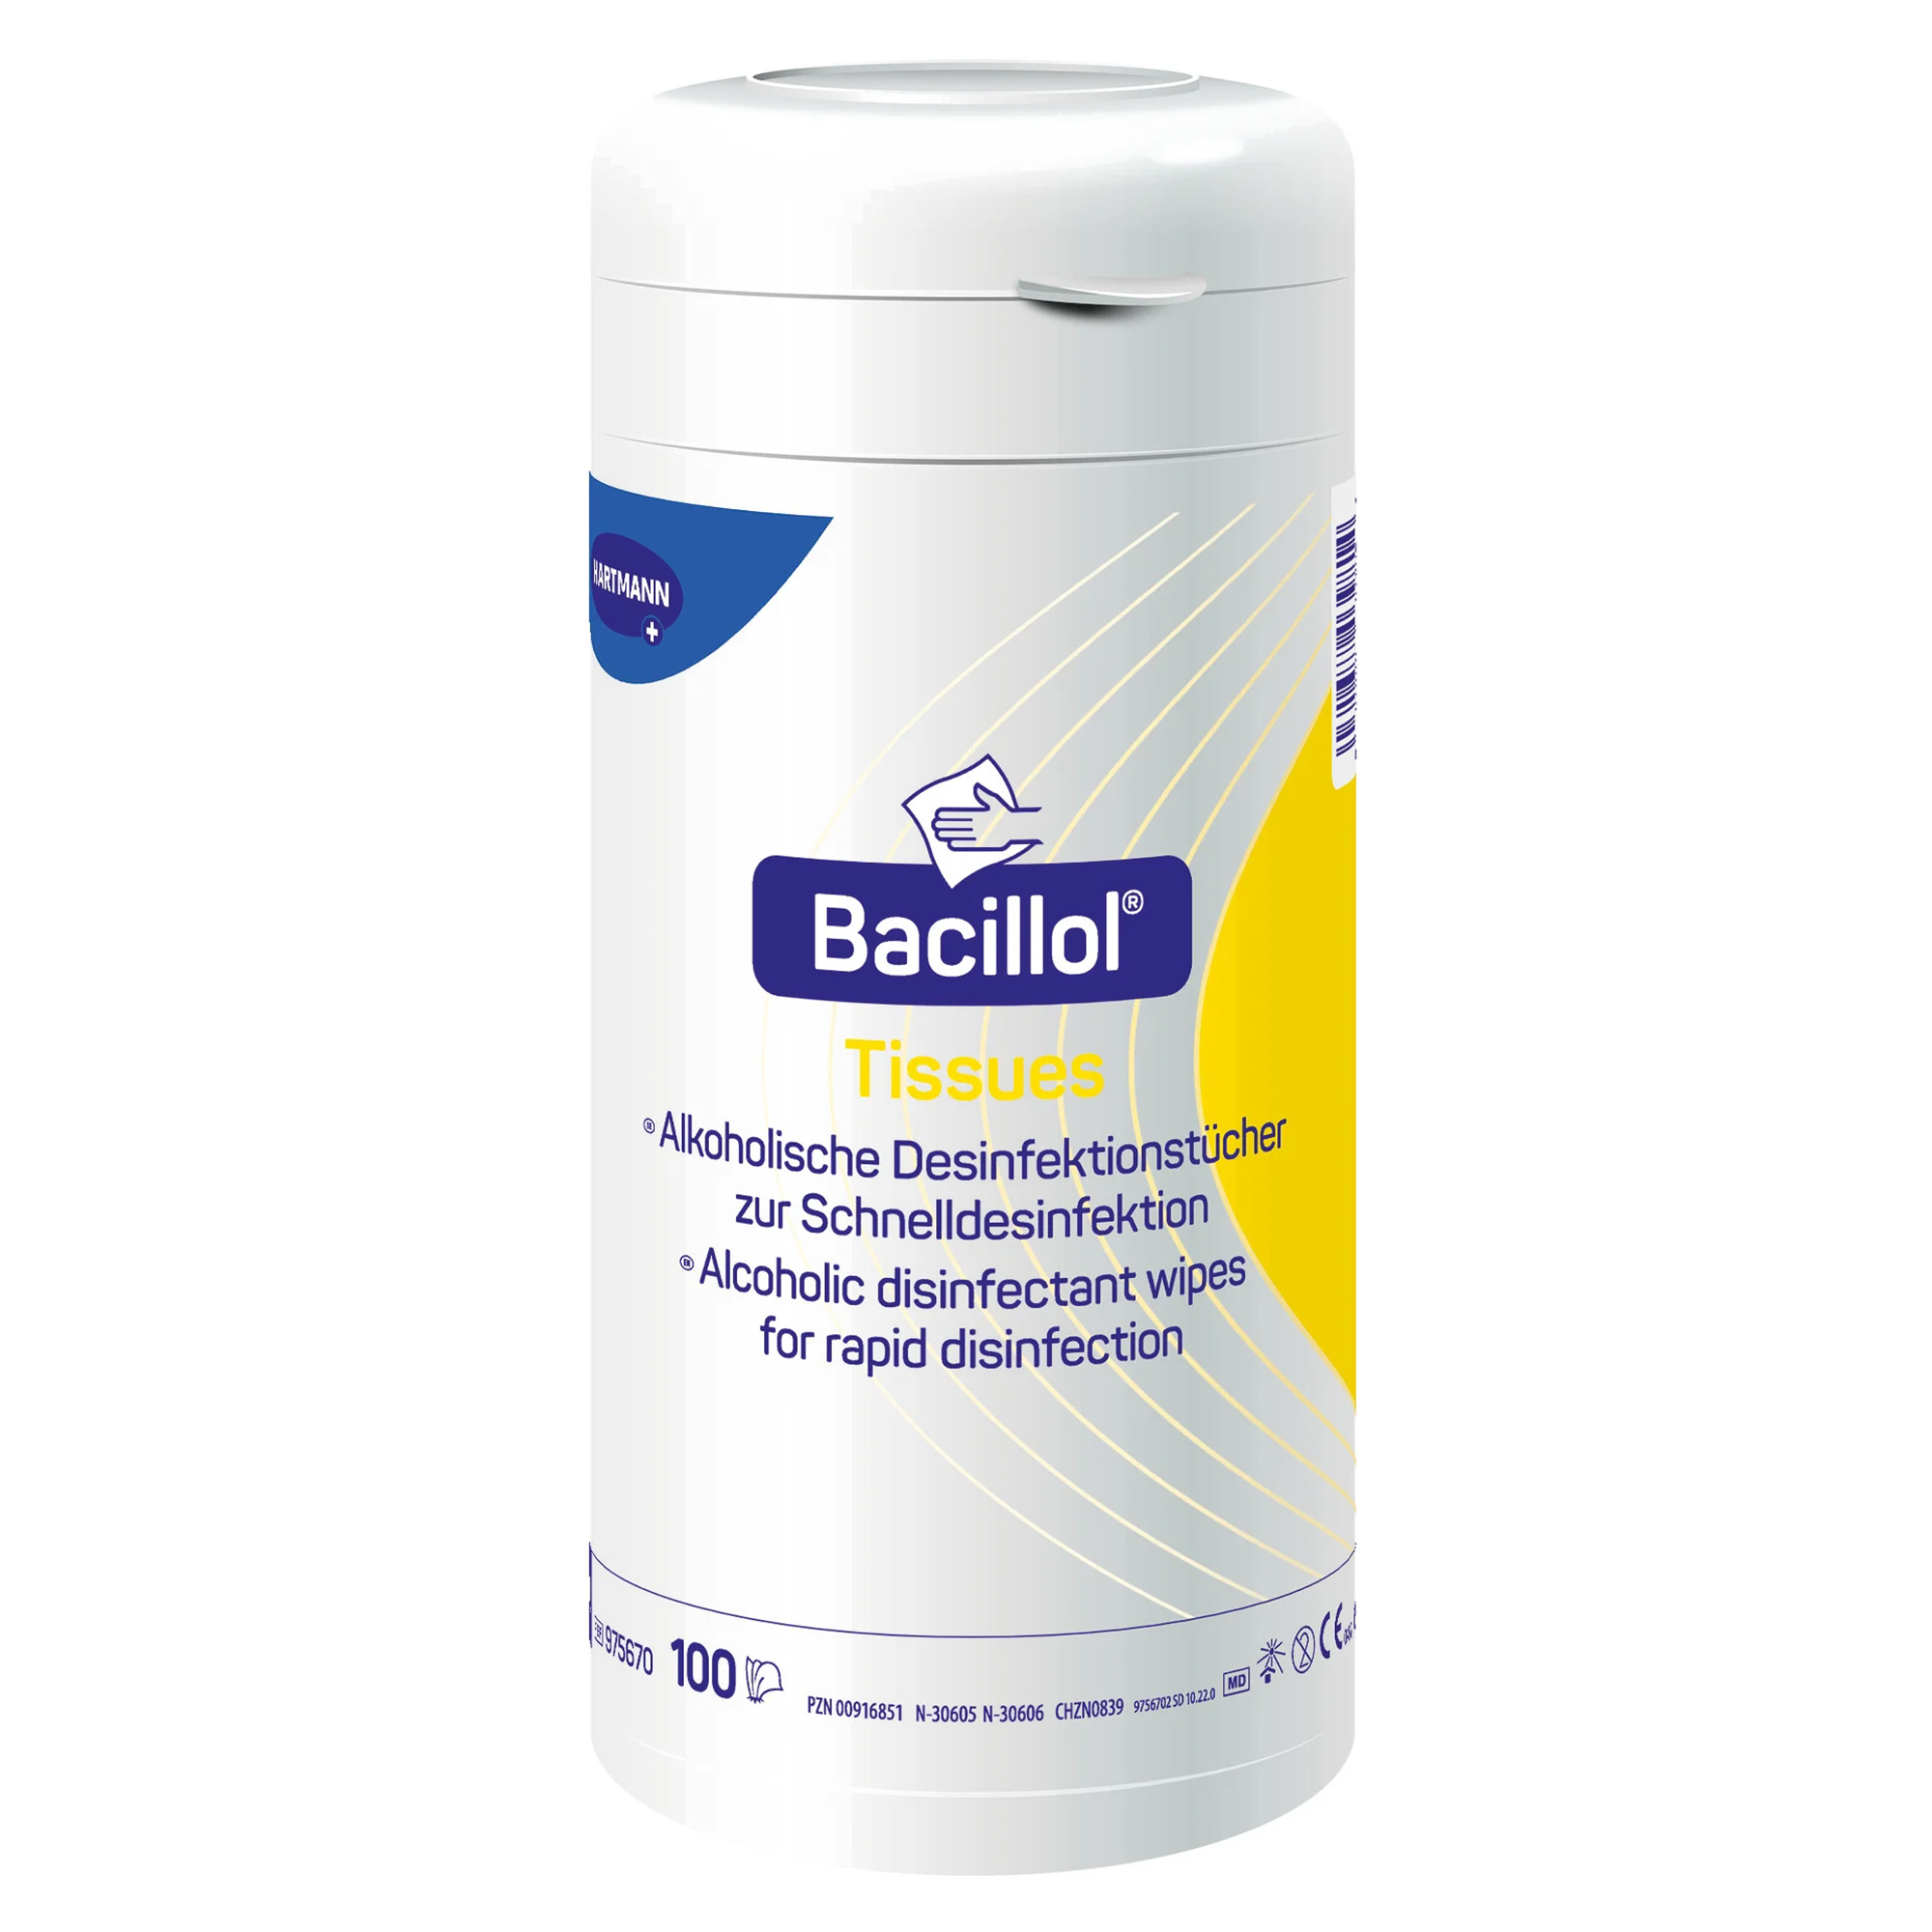 Bacillol Tissues, round container with 100 wipes